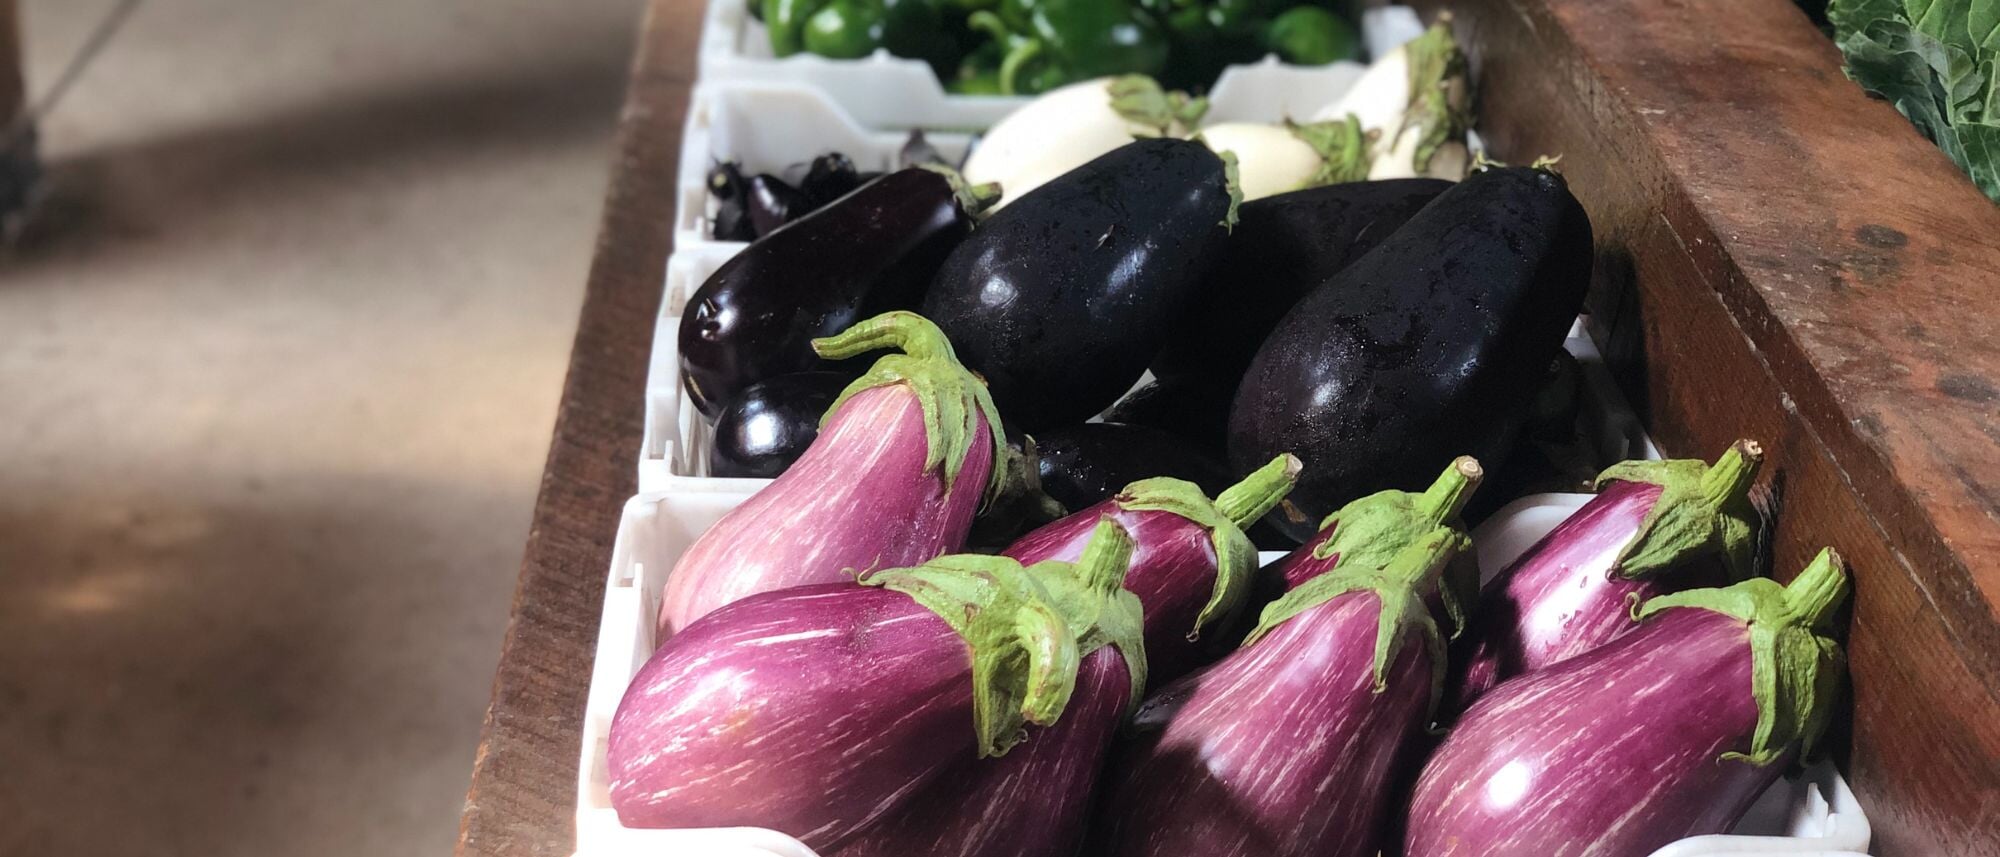 Grow purple, pink, or white eggplants in your home garden